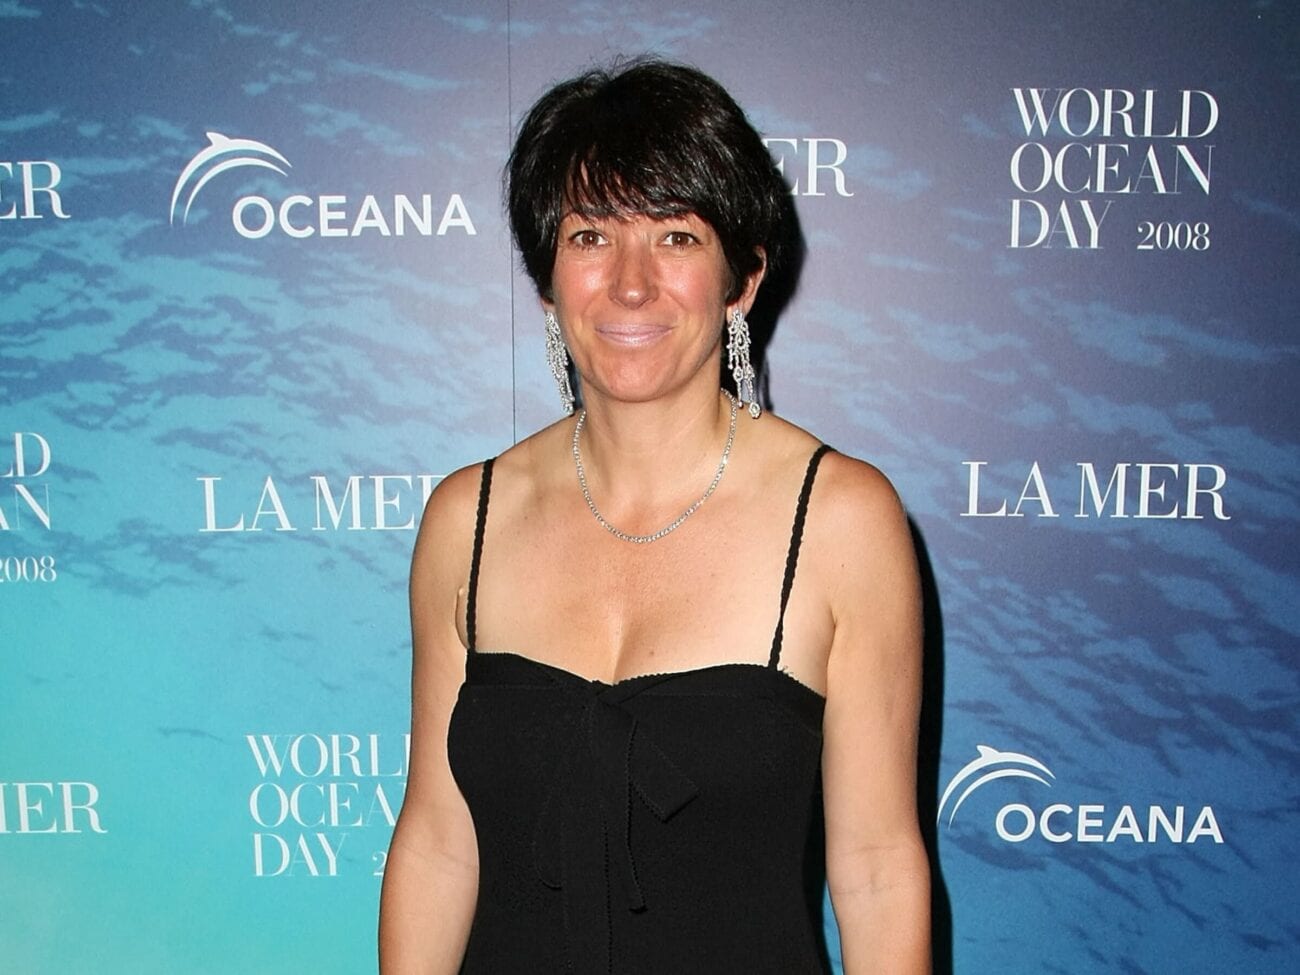 Ghislaine Maxwell is paying the piper for her and Jeffrey Epstein's crimes. See what's happening to her New Hampshire home while she's behind bars.